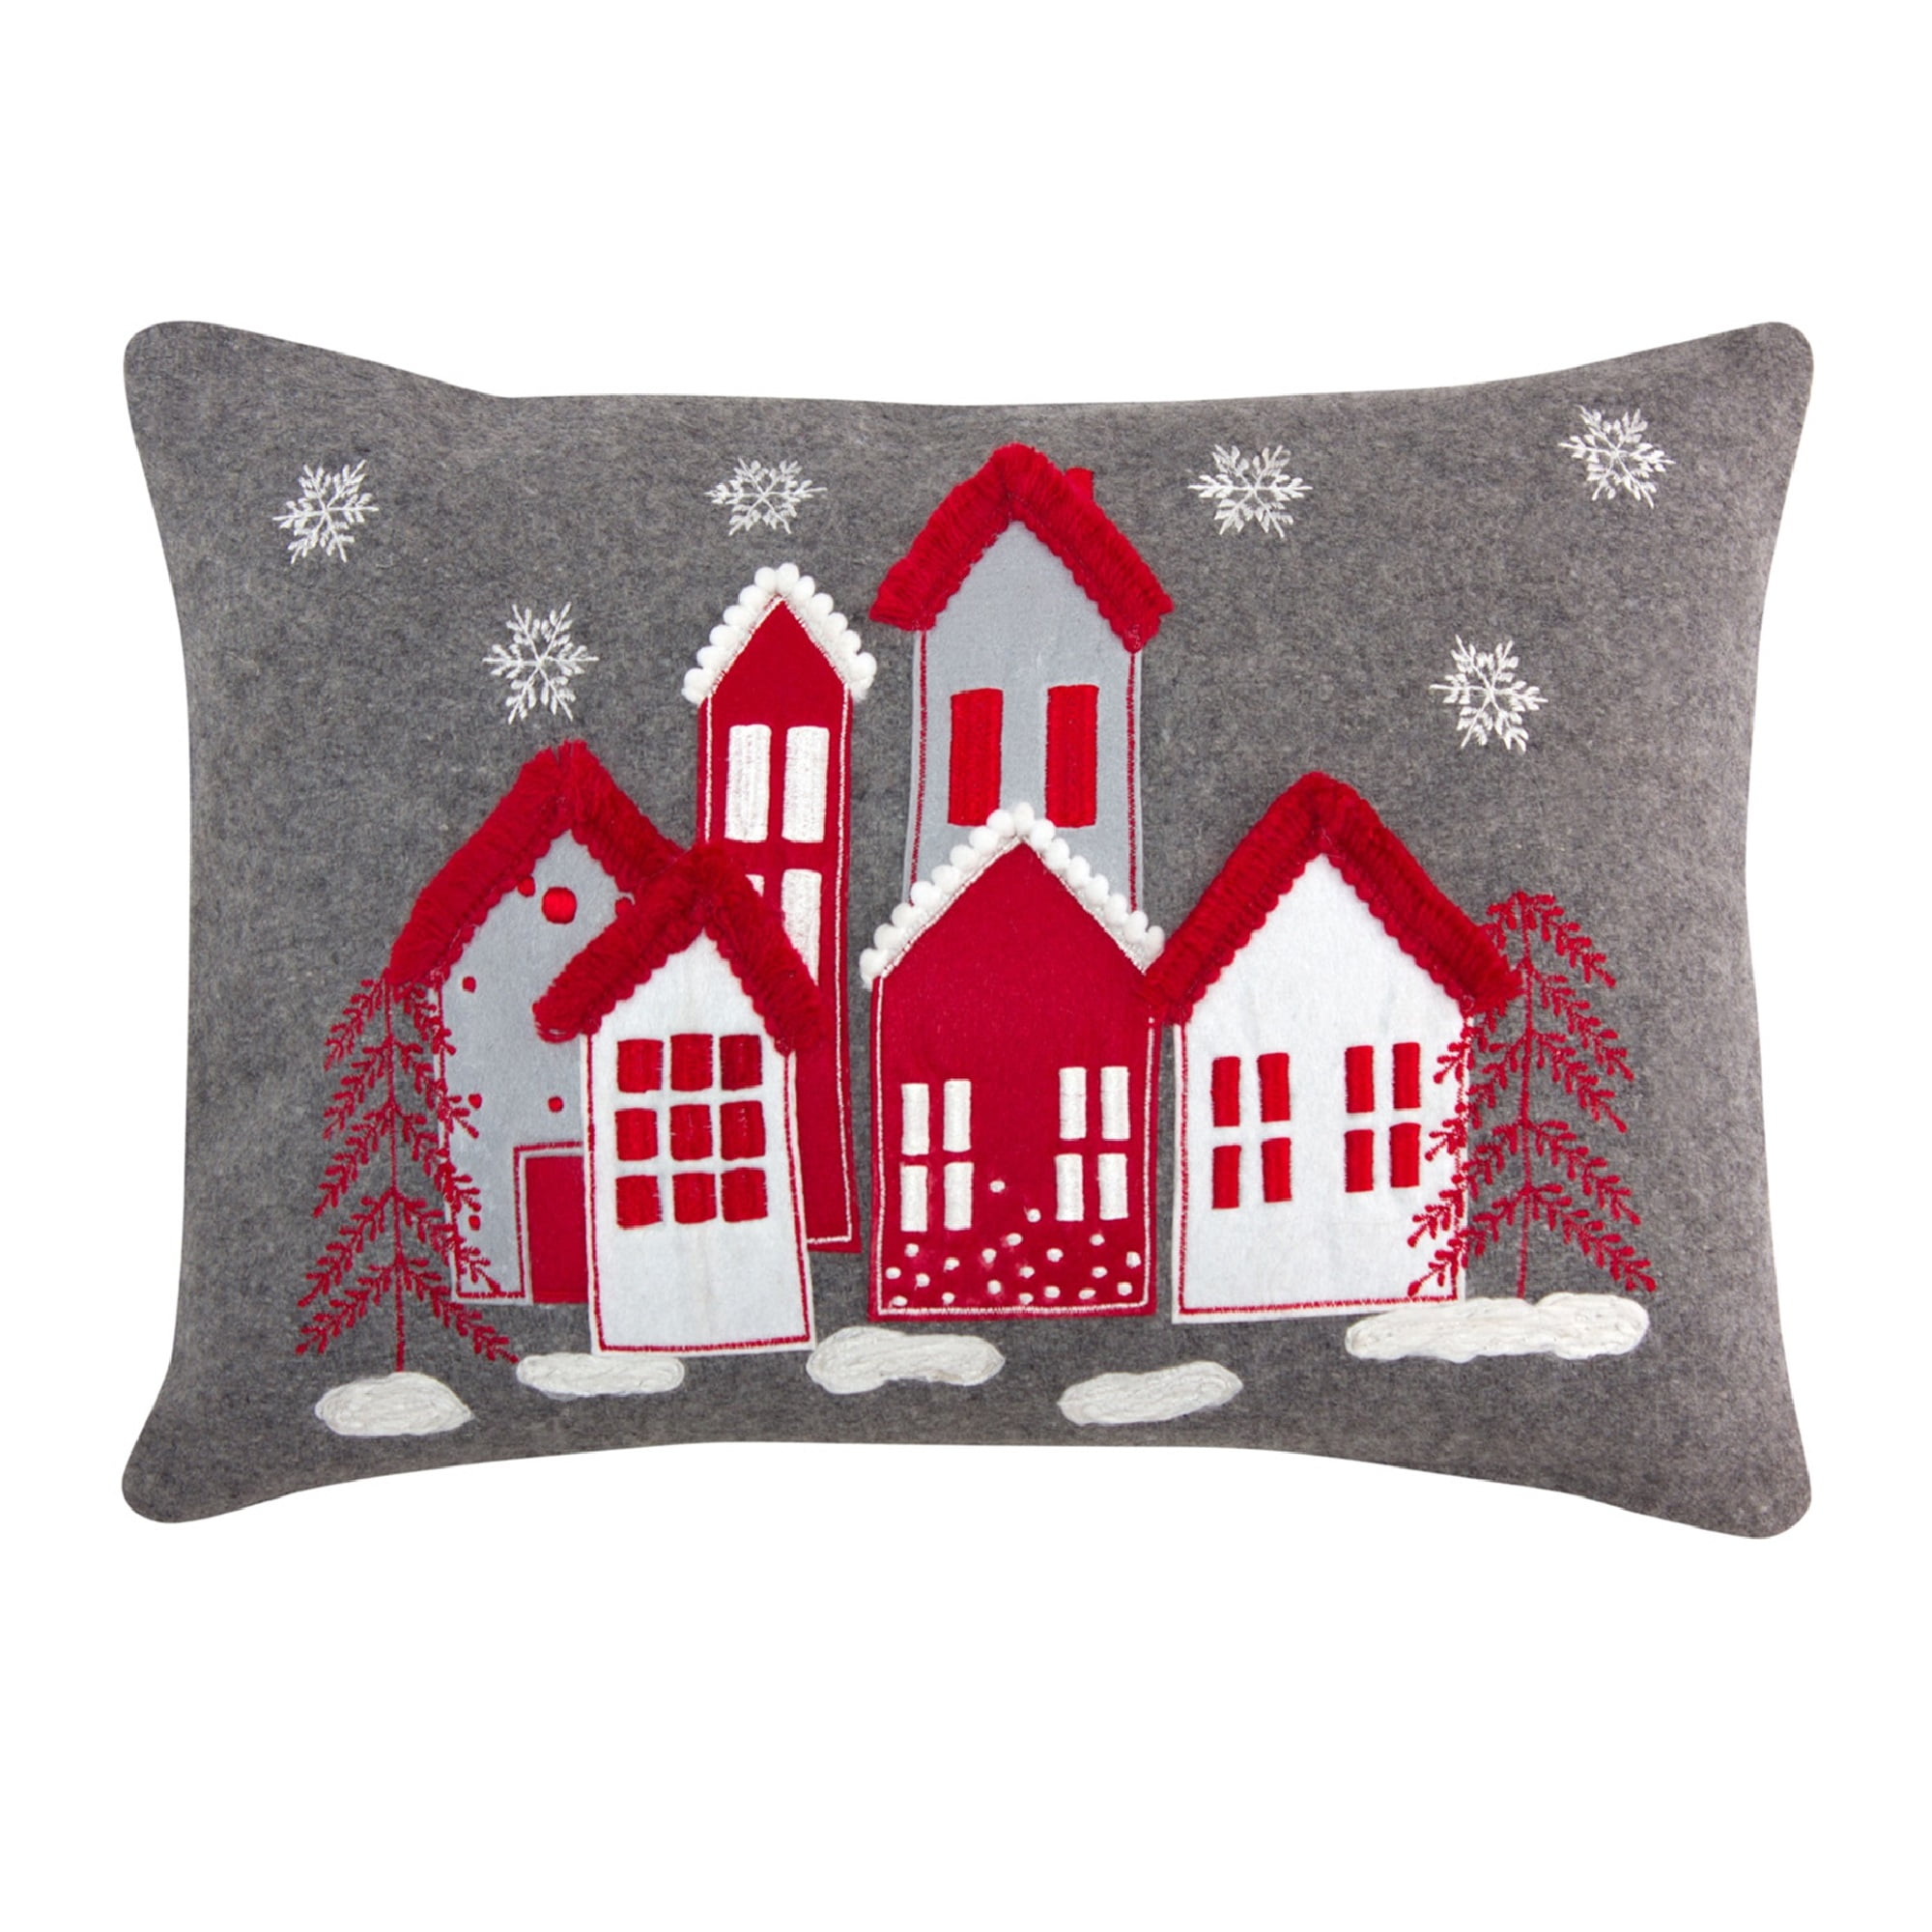 Pillow with Houses 18" x 12" Polyester